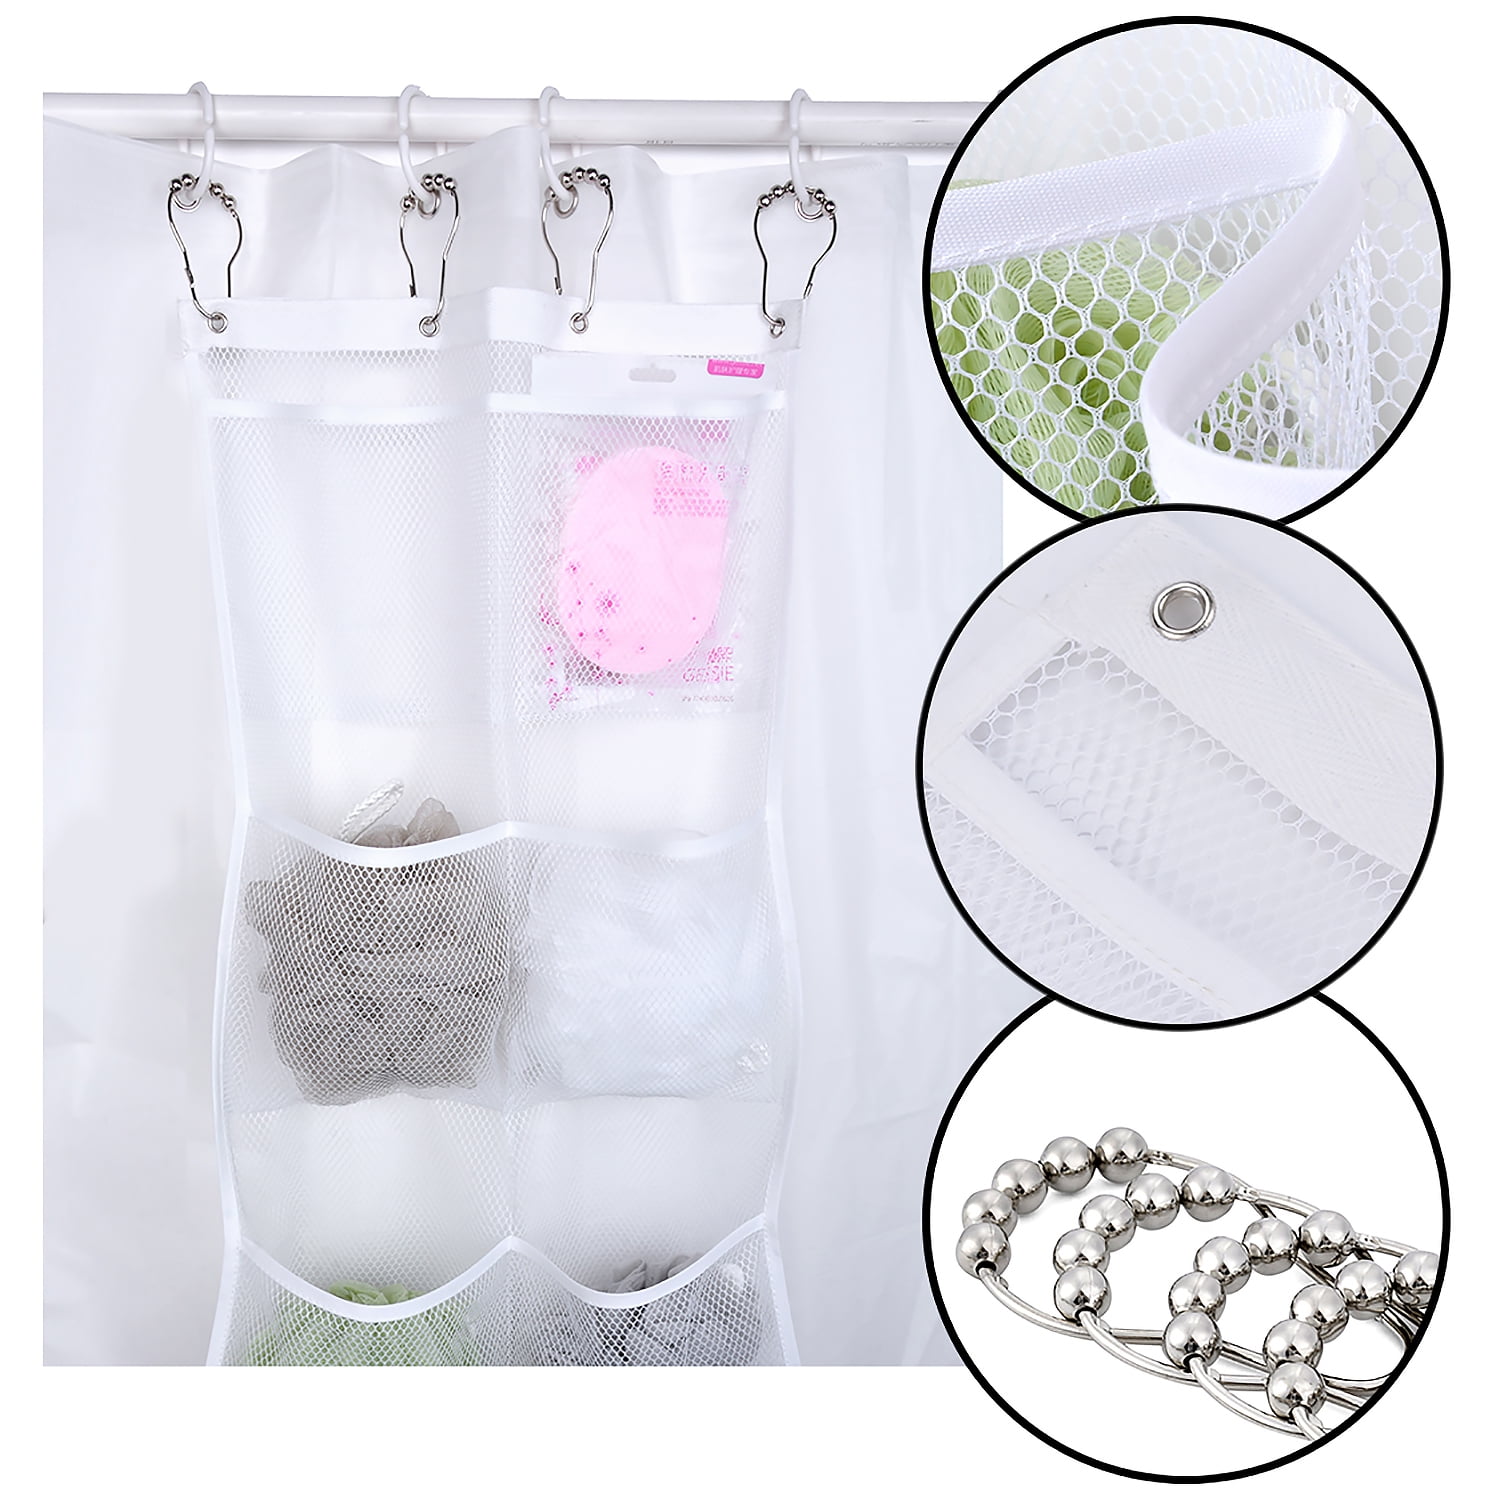 DAOYA Shower Caddy Over Shower Head Rustproof & Waterproof Shower Organizer  with 6 Hooks for Razor&Sponge - Over The Shower Head Caddy with Soap